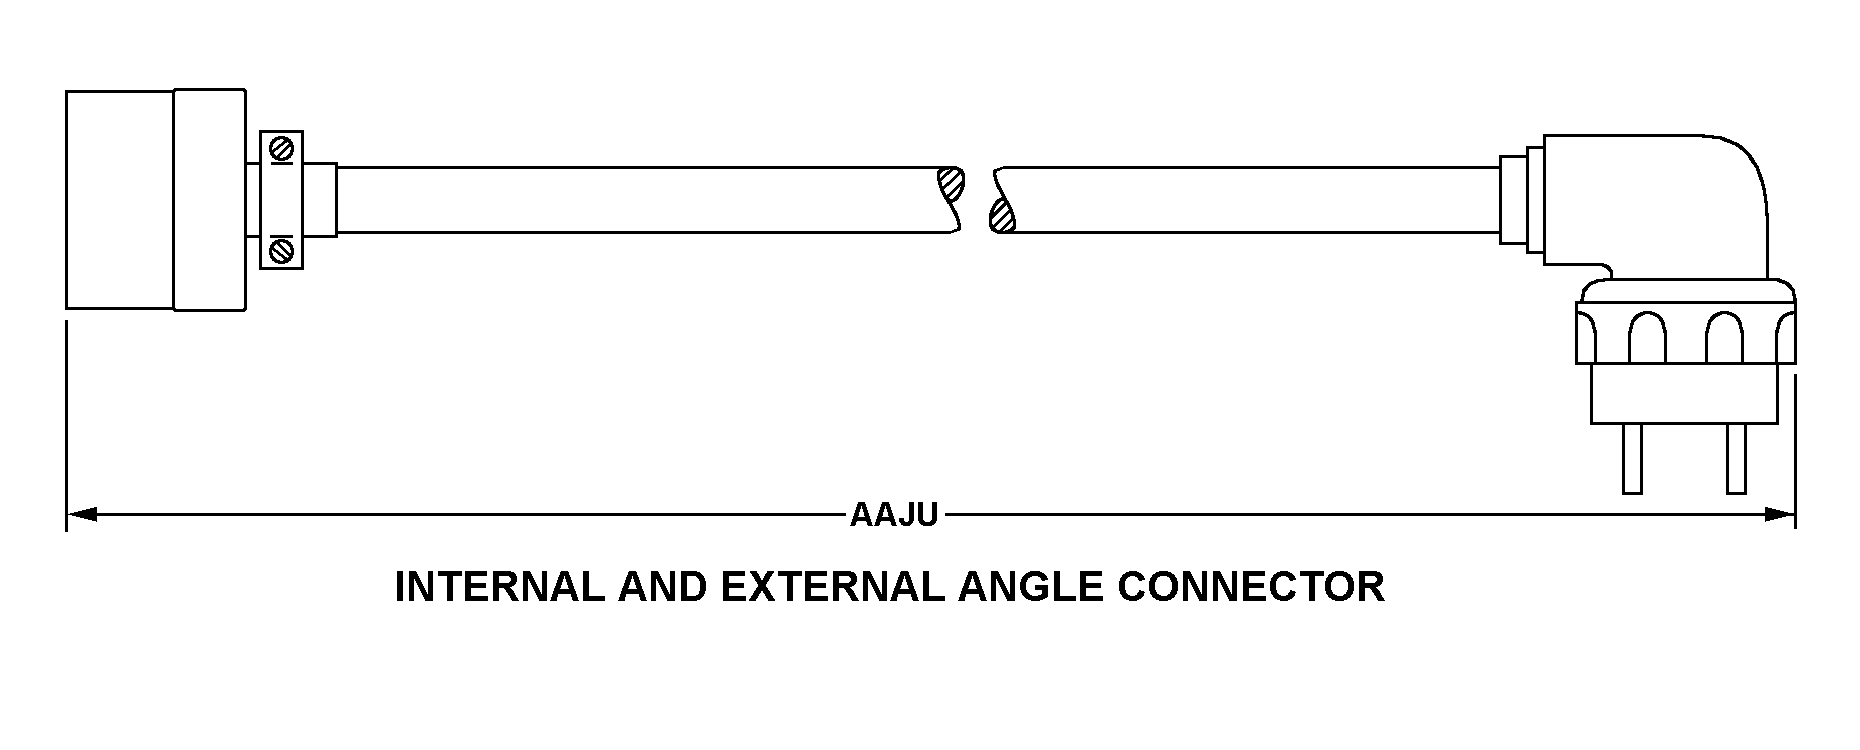 INTERNAL AND EXTERNAL ANGLE CONNECTOR style nsn 5995-01-073-6787